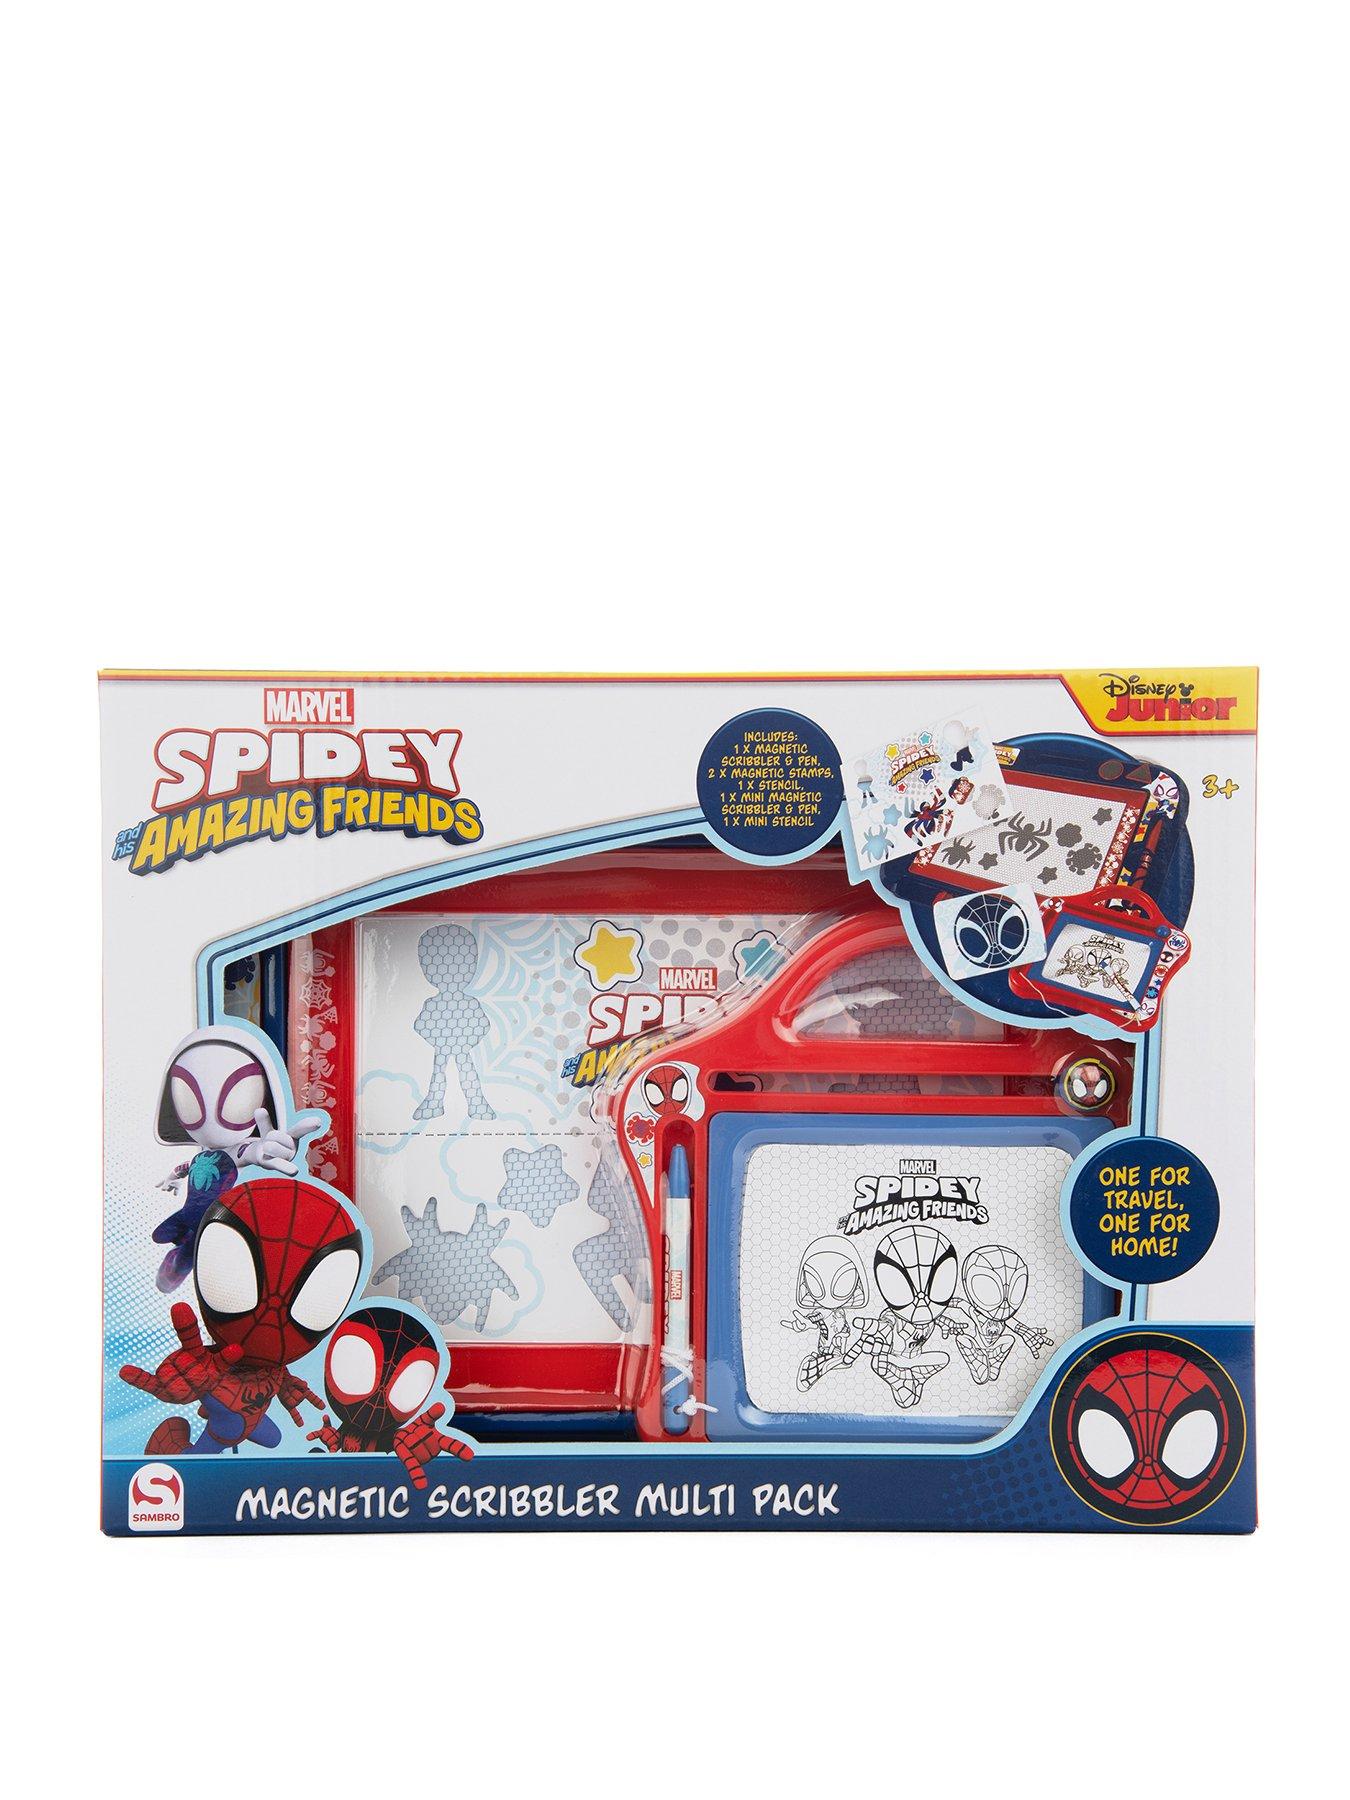 Spidey and His Amazing Friends Hero Reveal 2-Pack, 4-Inch Marvel Action  Figures Mask-Flip Feature, Spidey and Trace-E, Kids Easter Basket Stuffers  or